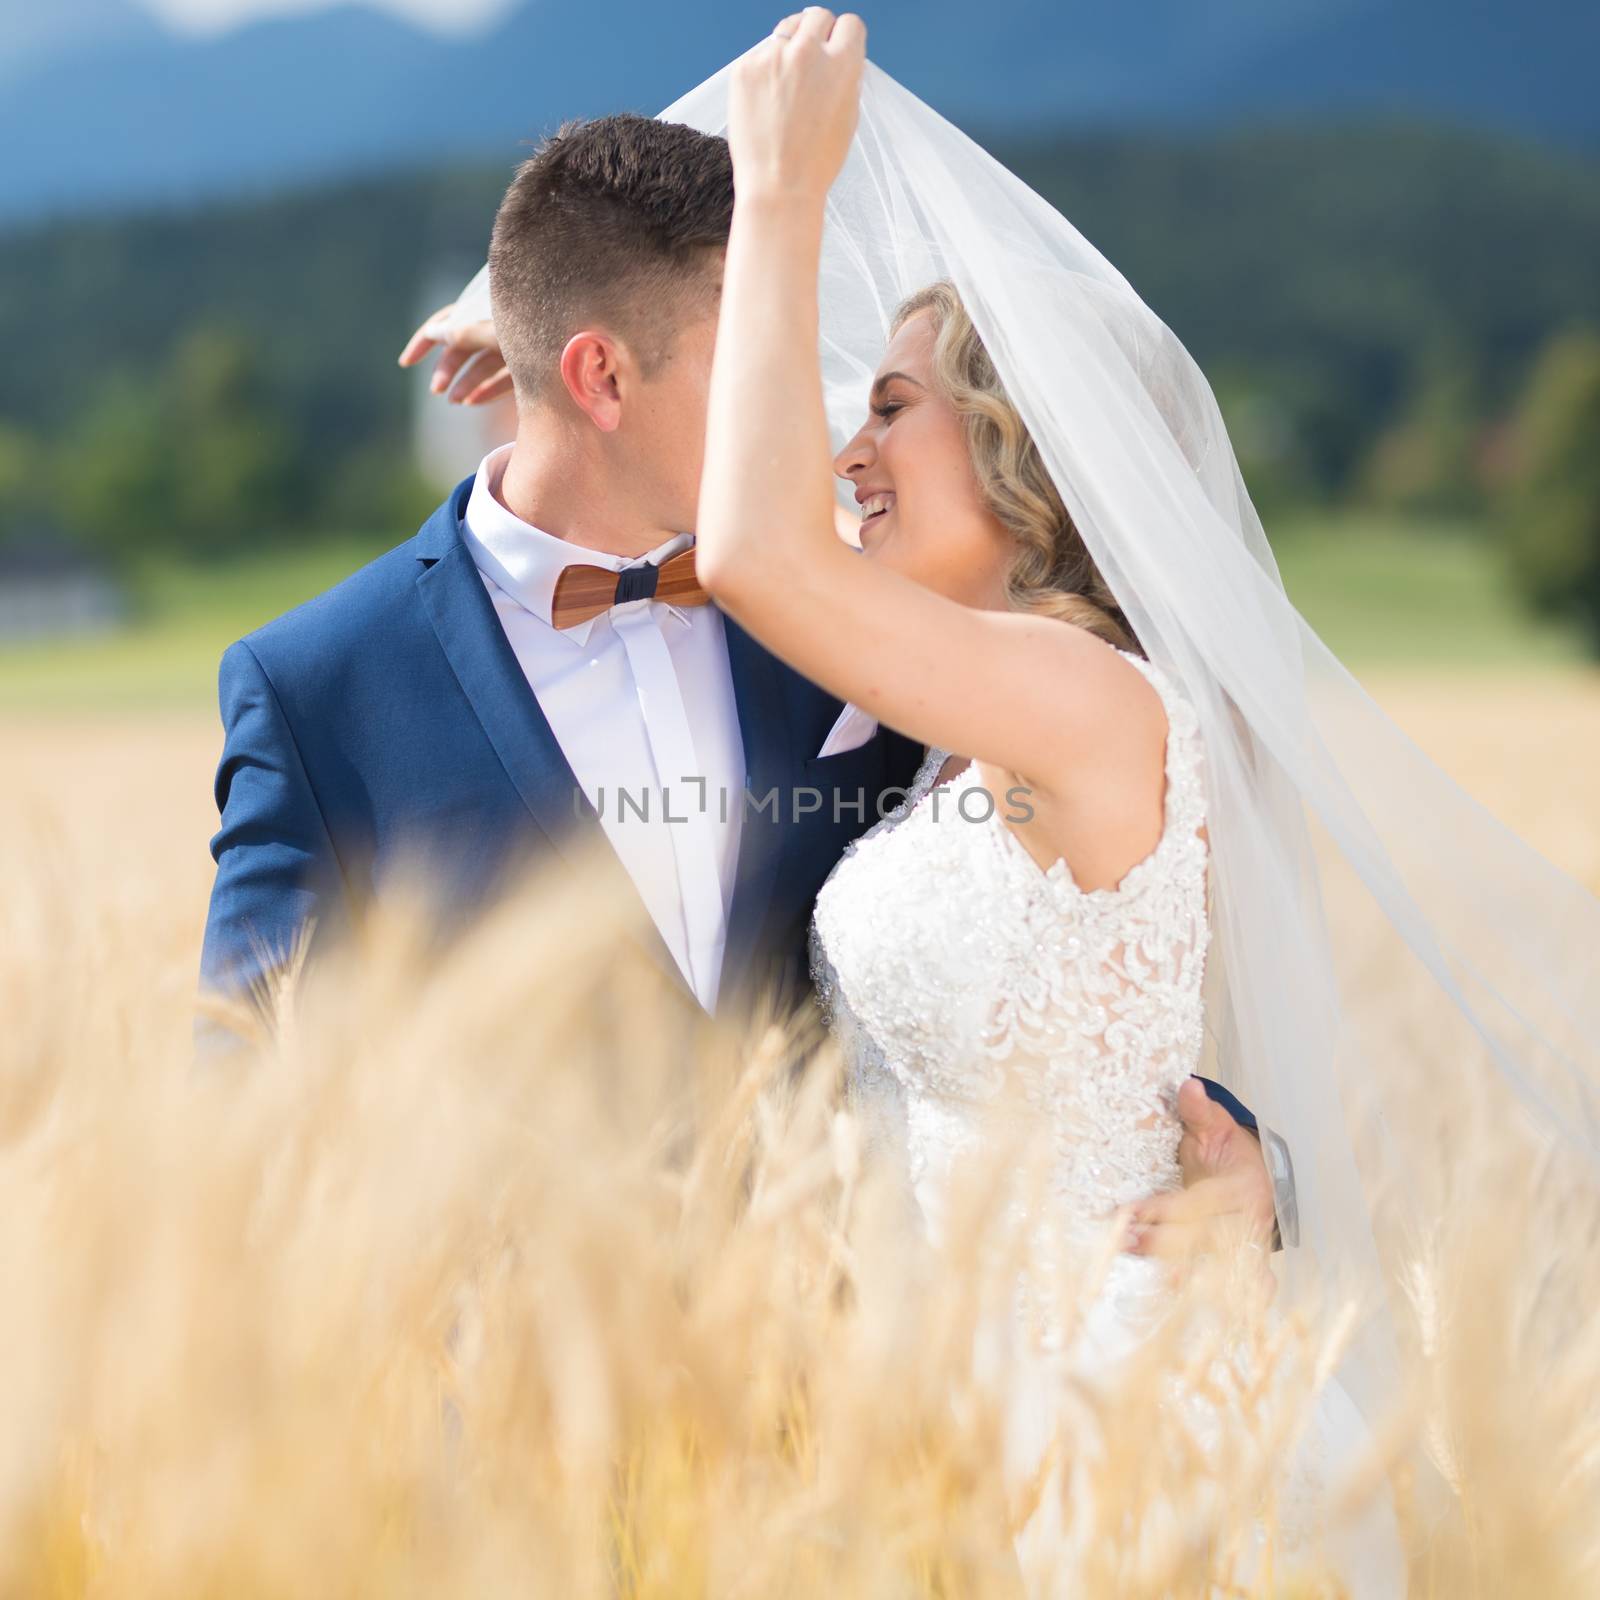 Groom hugs bride tenderly while wind blows her veil in wheat field somewhere in Slovenian countryside. Caucasian happy romantic young couple celebrating their marriage.